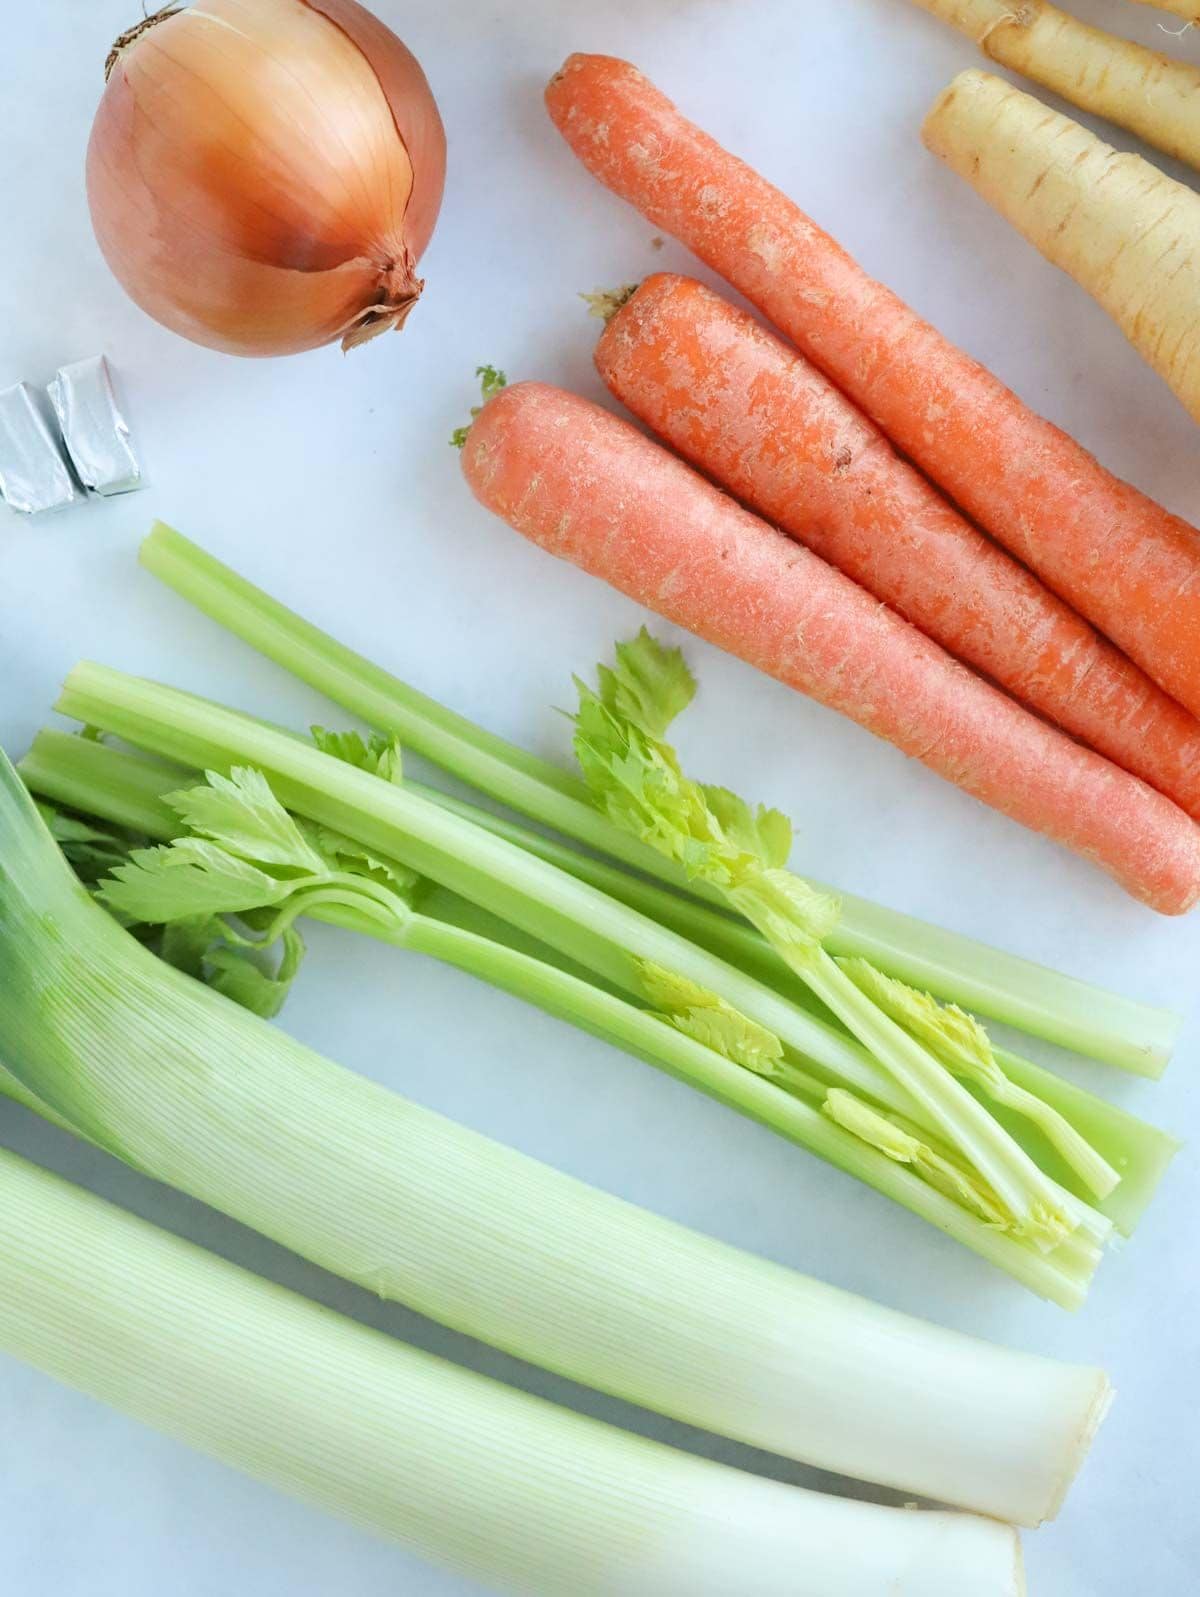 Ingredients for slow cooker vegetable soup laid on a counter. Carrots, leeks, onion, parsnip and celery.